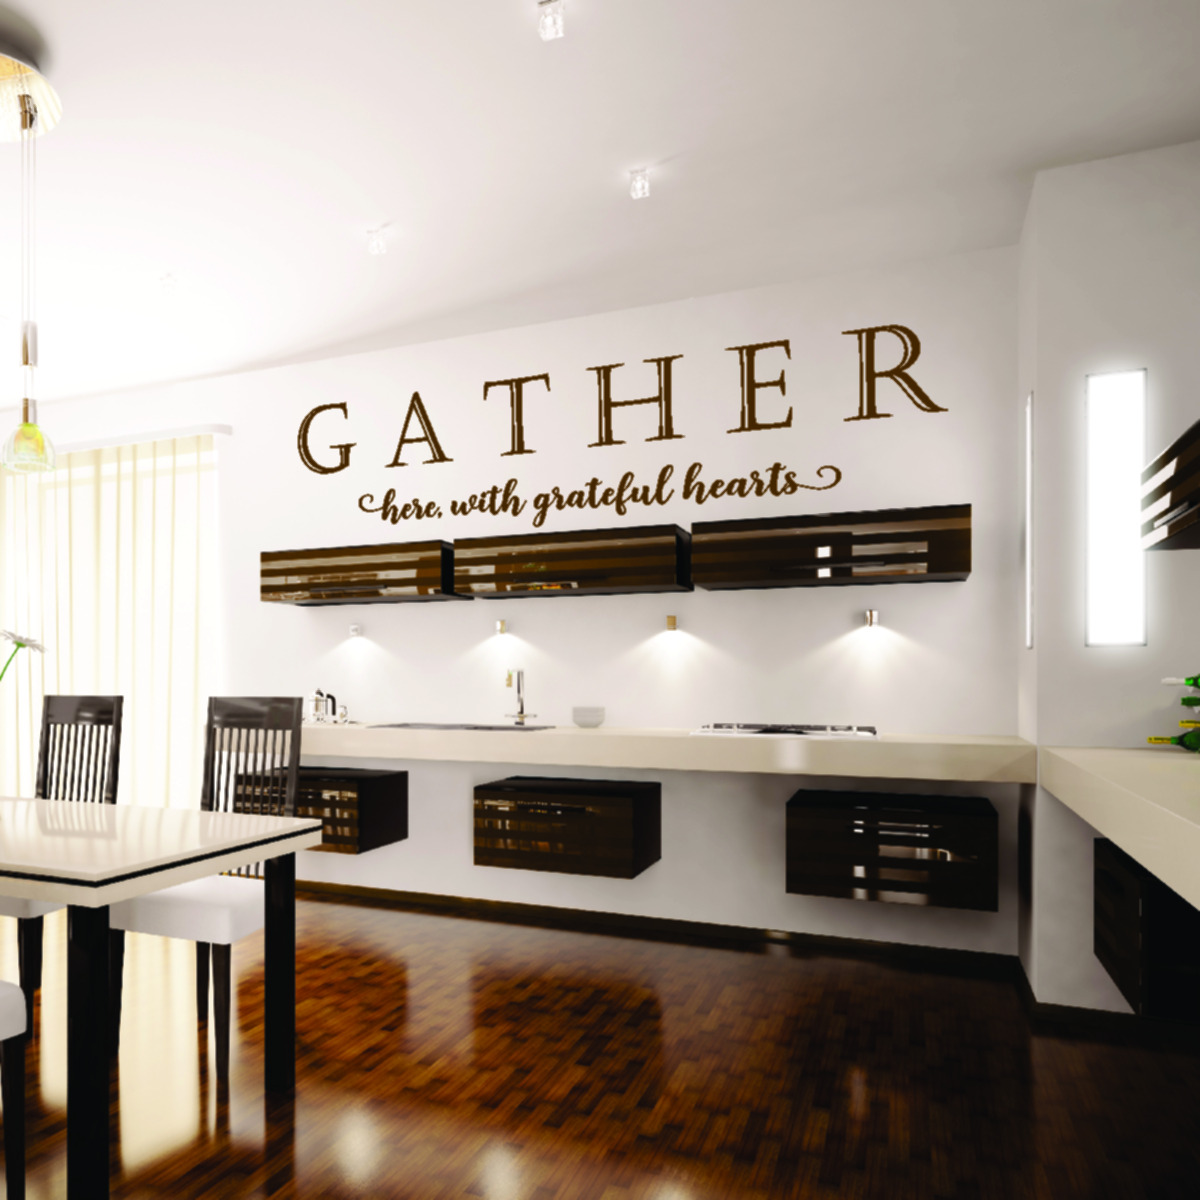 Gather here